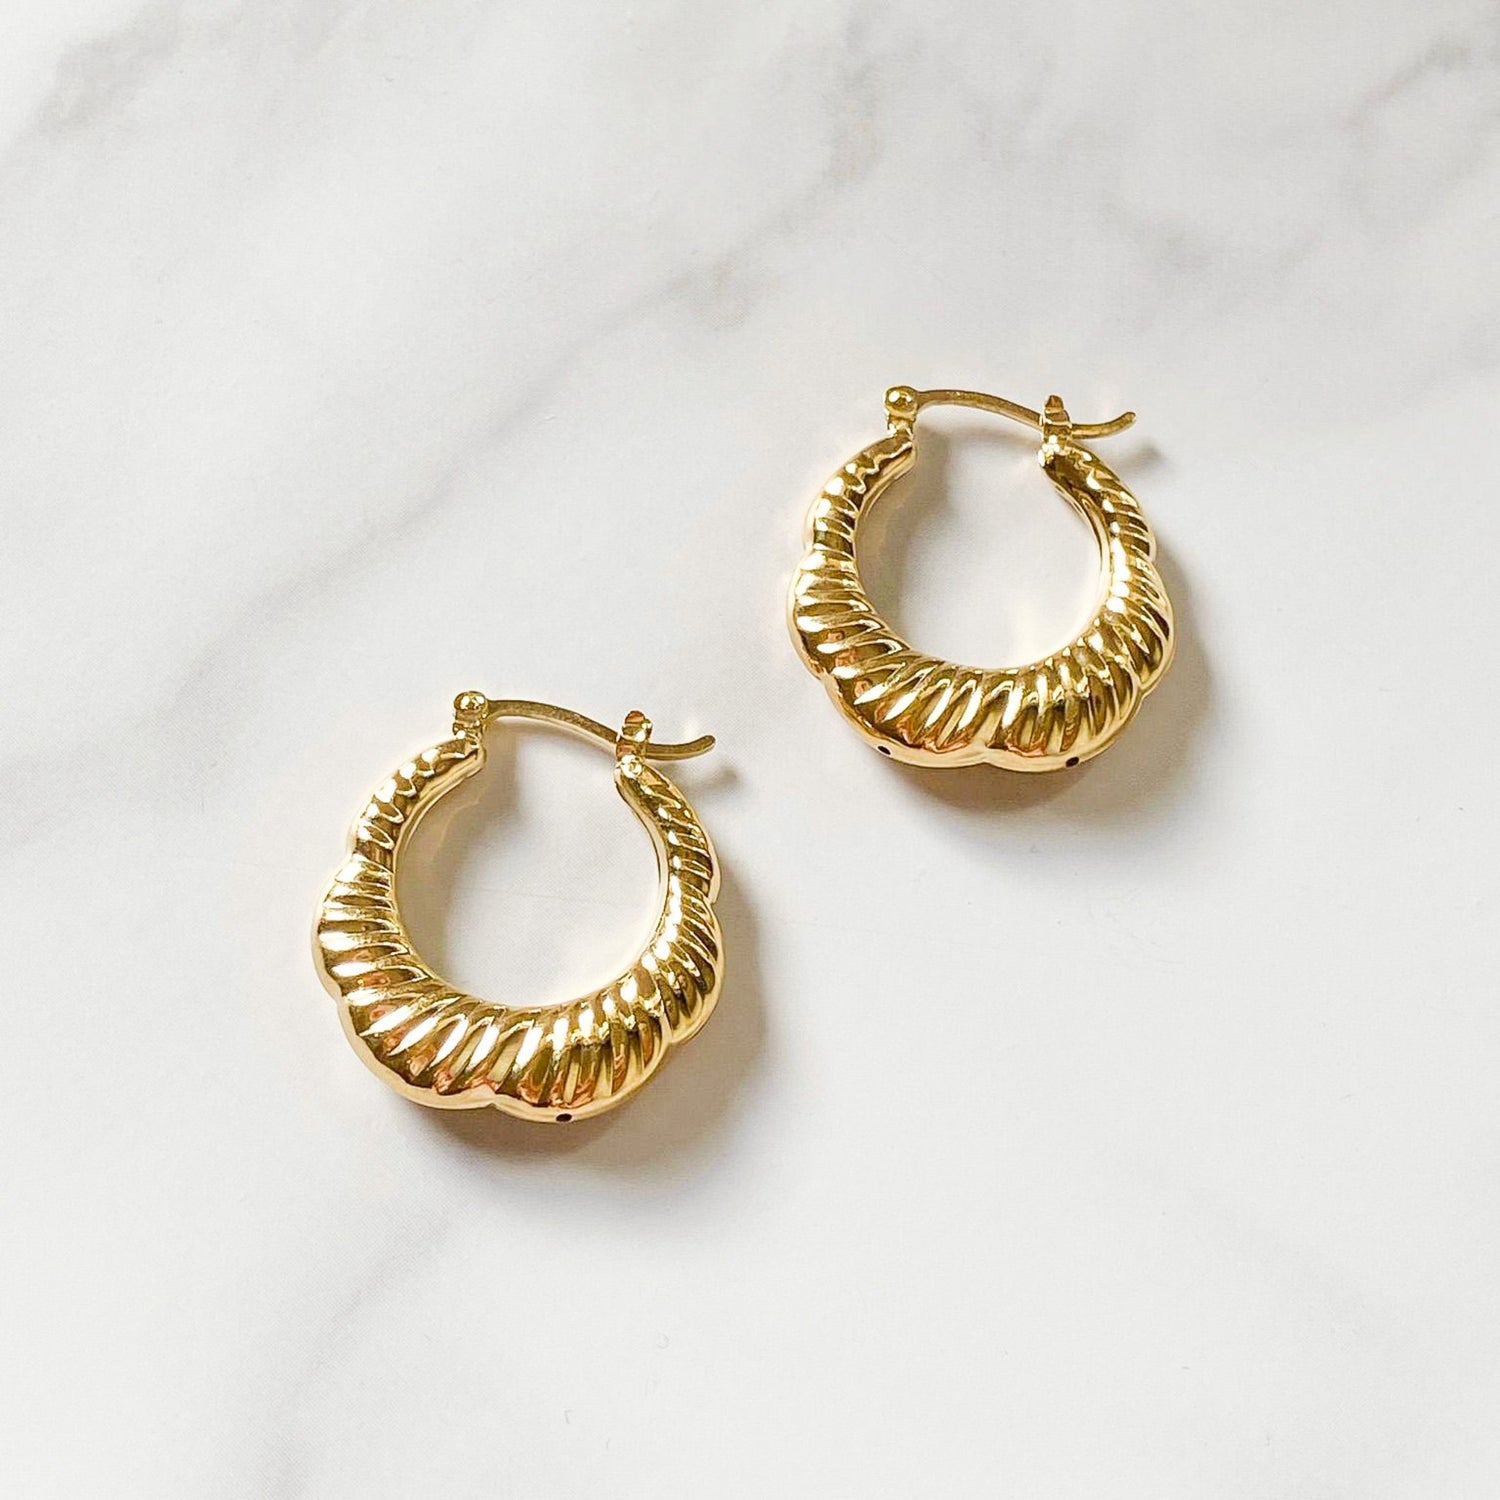 Croissant gold-filled hoops made in Brazil, hypoallergenic, water-resistants, and stylish. Sold by ISVI Boutique Miami